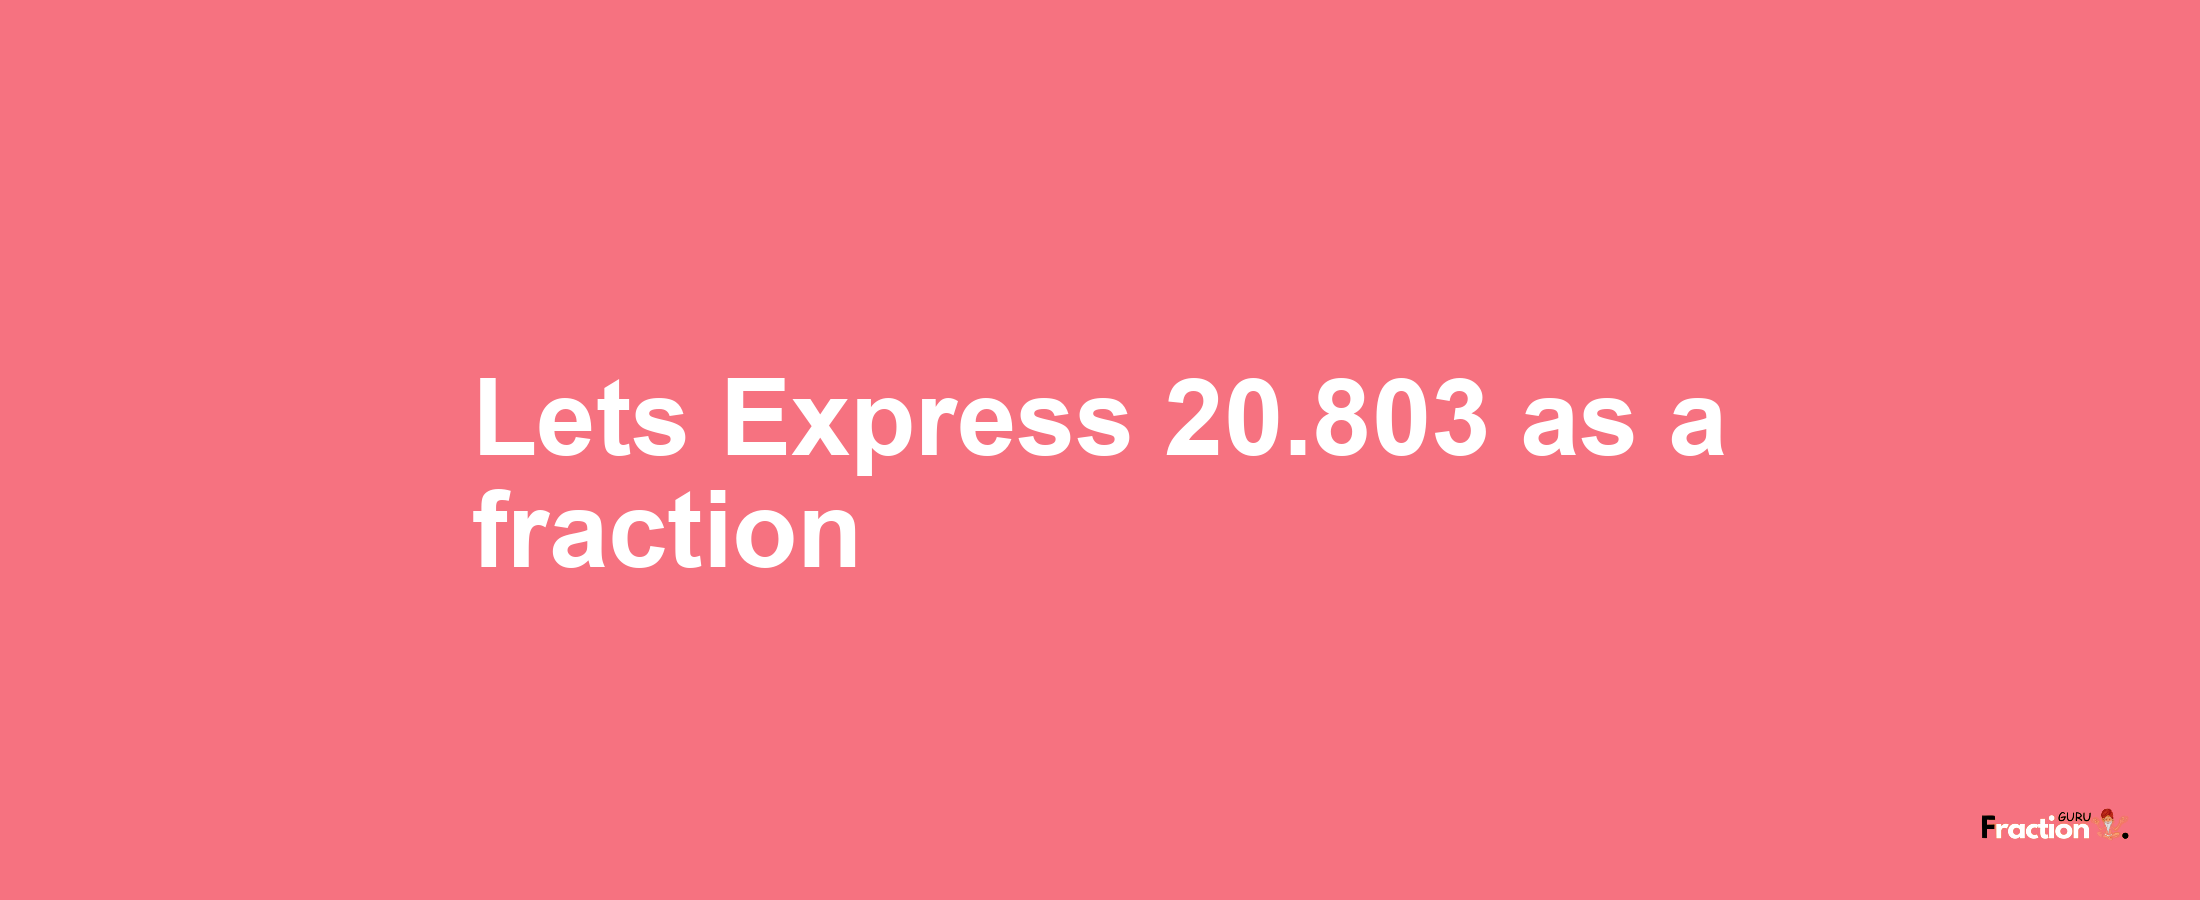 Lets Express 20.803 as afraction